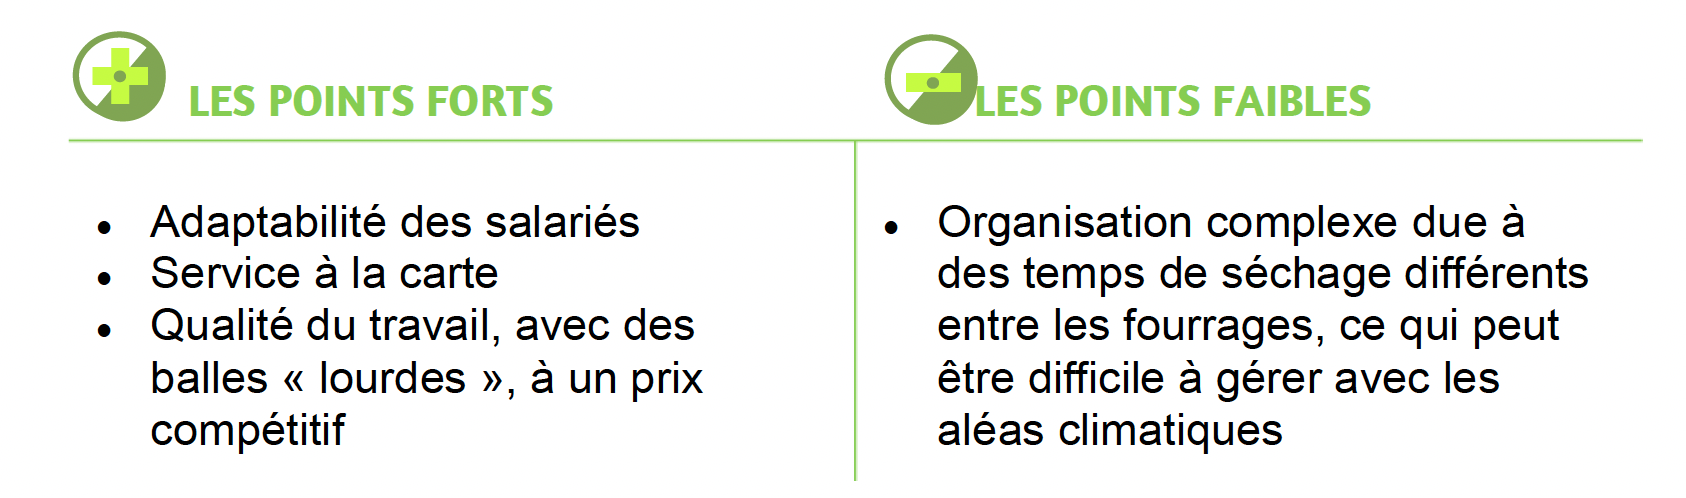 Récapitulatif points forts faible organisation cuma lombers